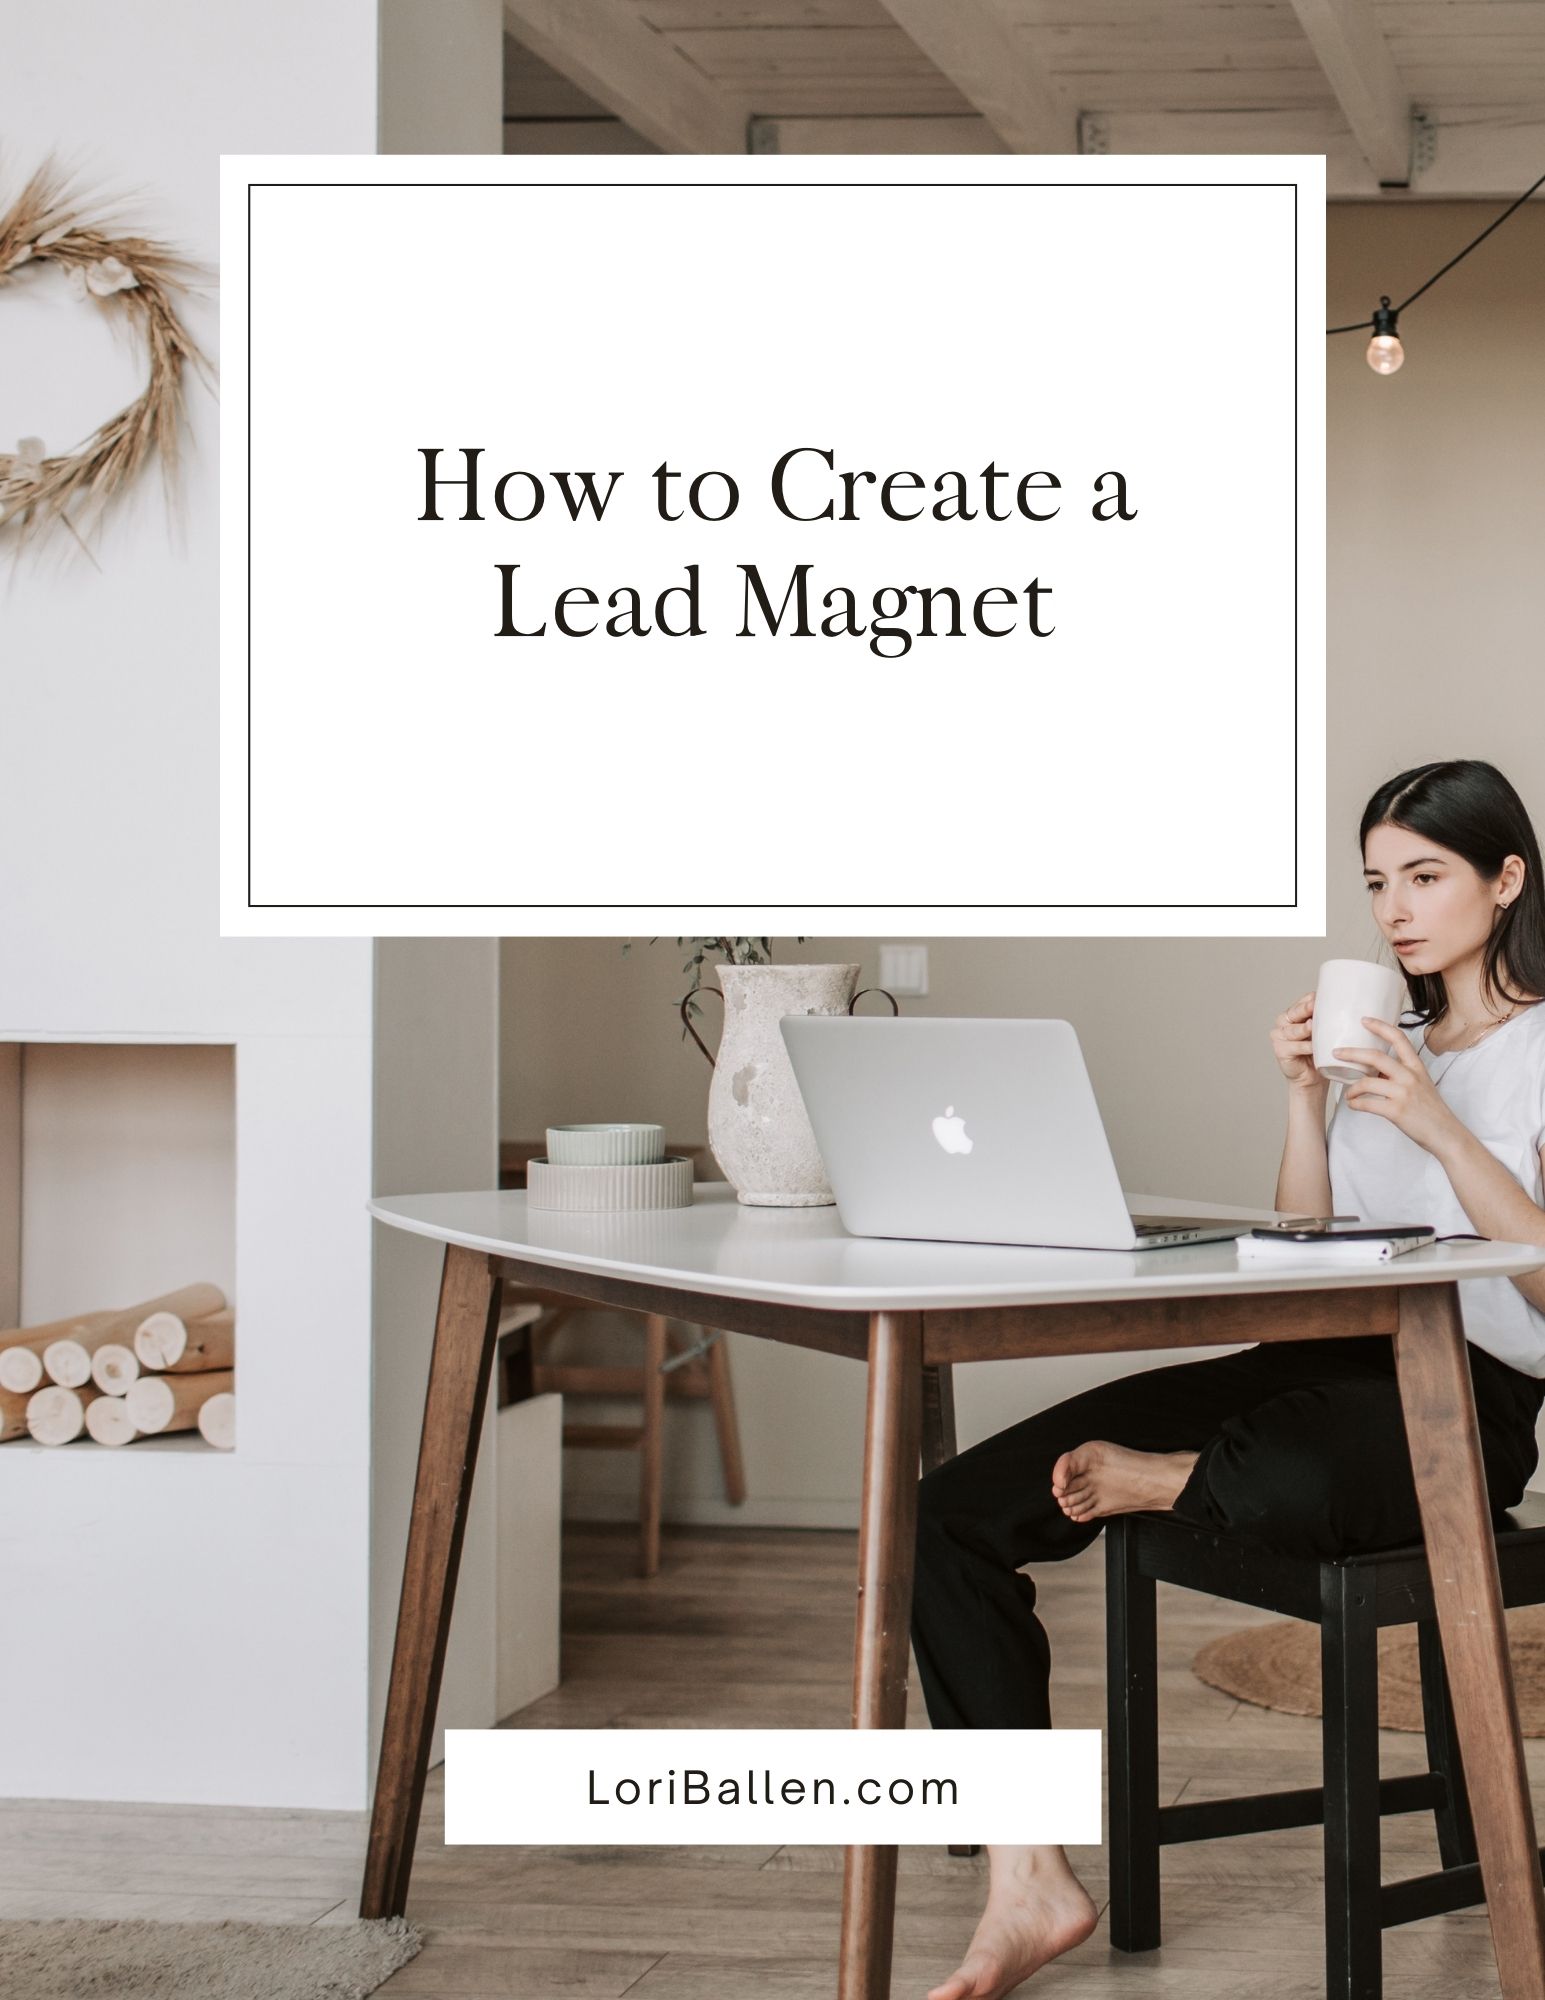 There are many benefits that come with using lead magnets. First and foremost, they help you attract more leads. By offering something of value for free, you're able to reach a wider audience and get your foot in the door with potential customers.